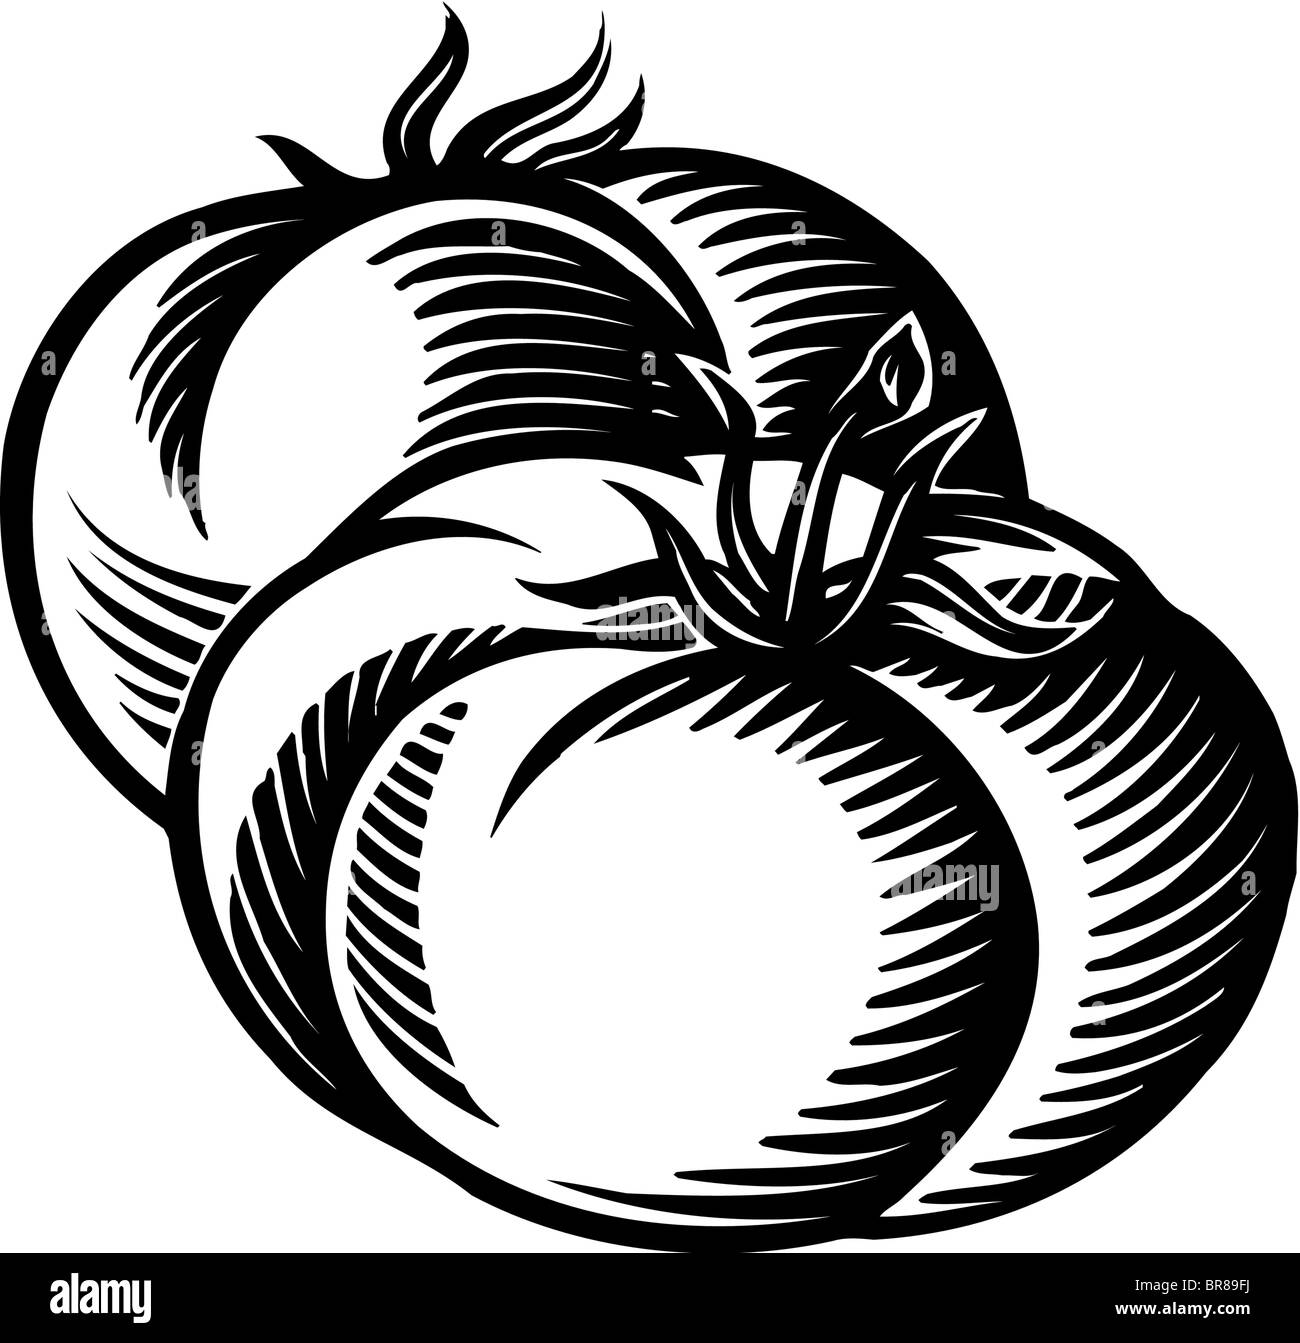 A drawing of two plump tomatoes in black and white Stock Photo